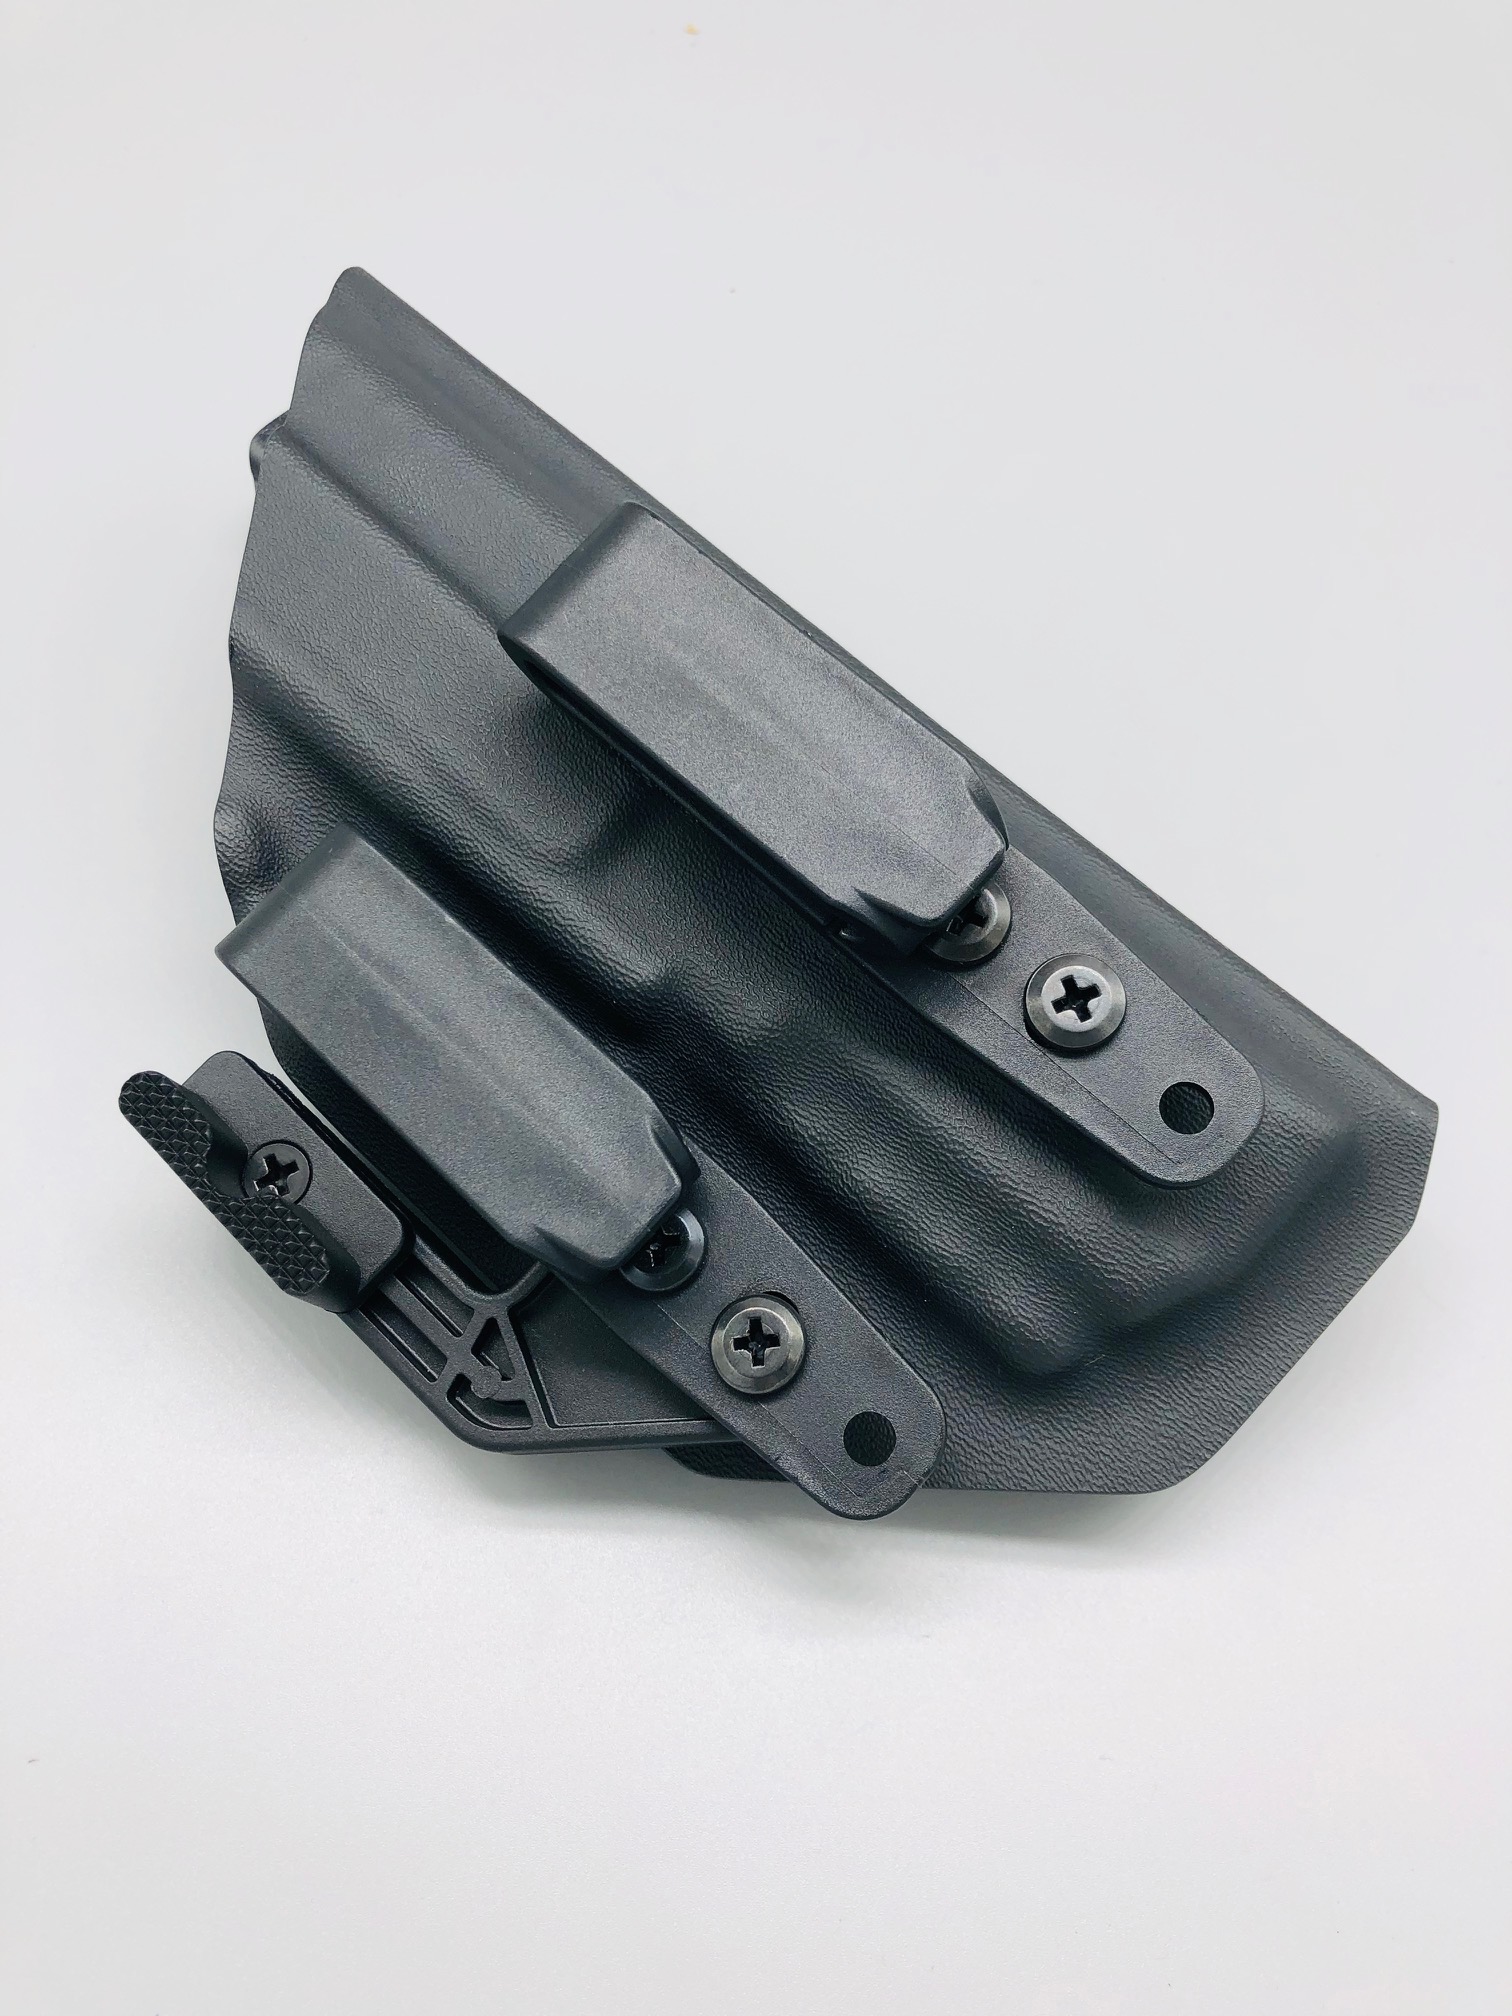 Neptune Concealment IWB Kydex Holster for Walther PPQ Veteran Made USA Triton 2.0 Series w/ Mod Wing 